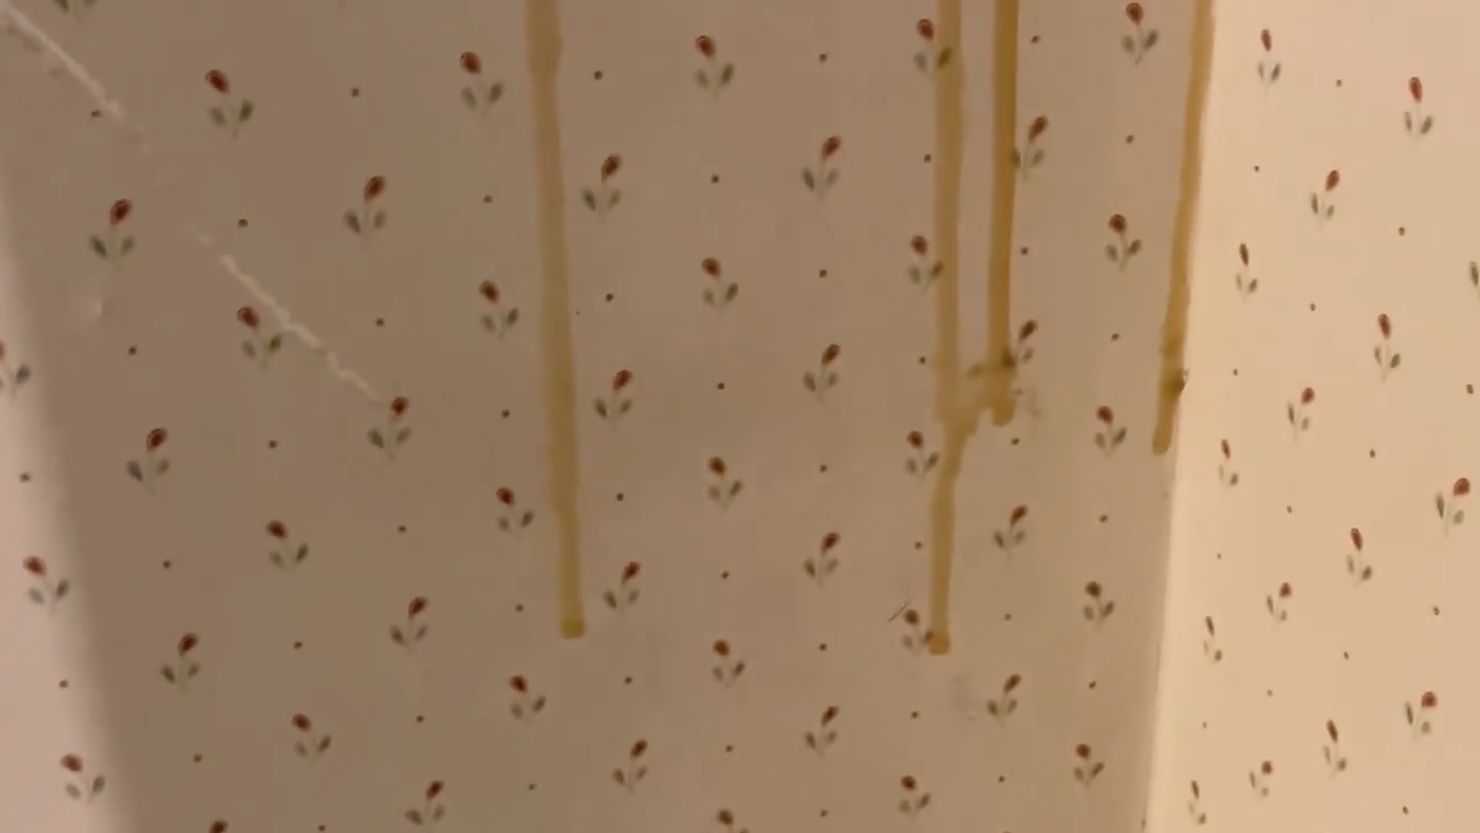 80,000 Bees, 100 lbs. of Honey, Found in Florida Couple's Bathroom Wall